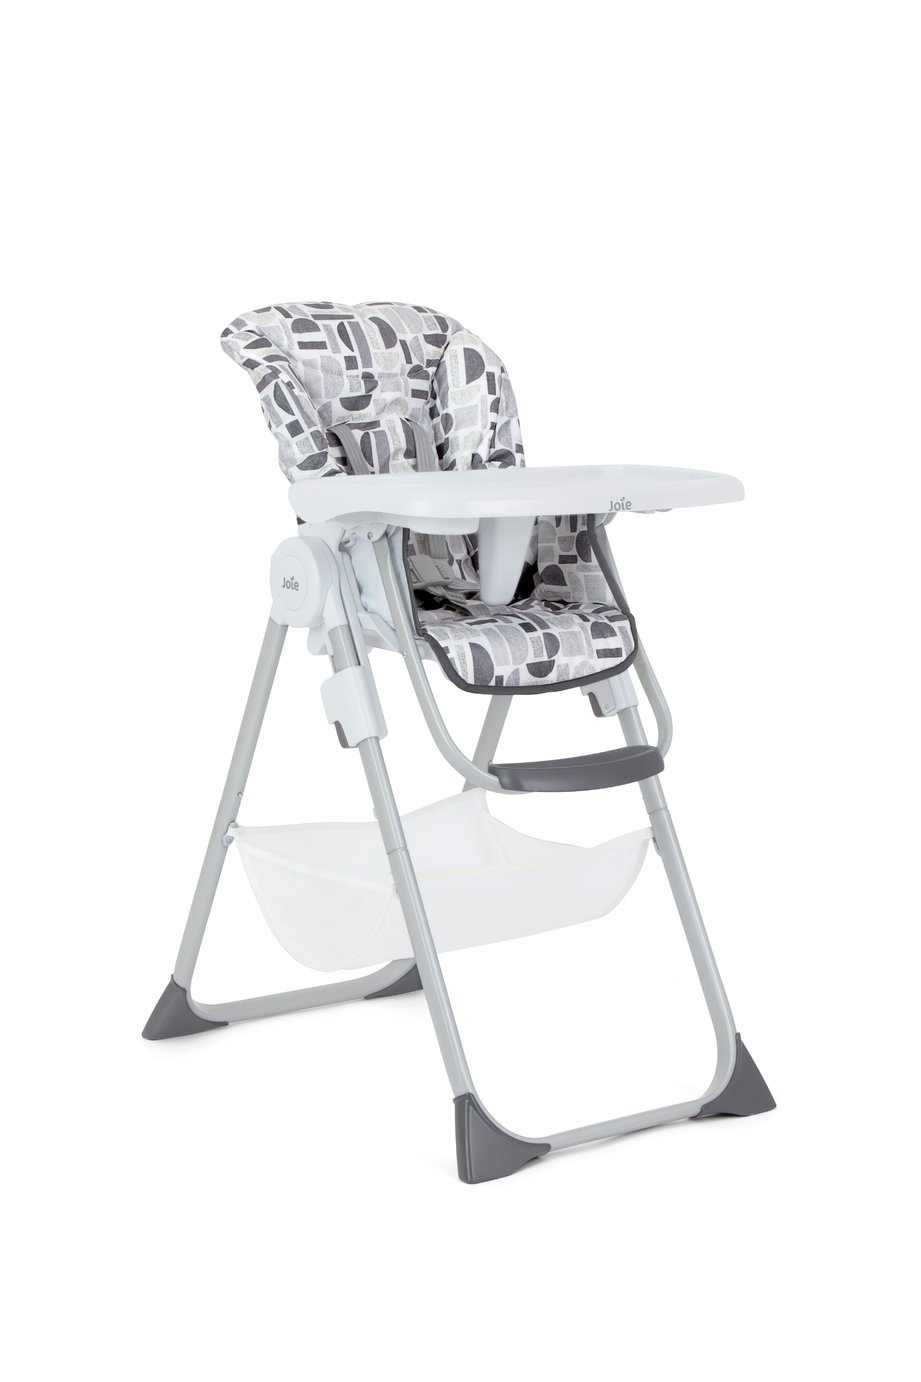 Joie Mimzy Snacker 2-in-1 Highchair Review